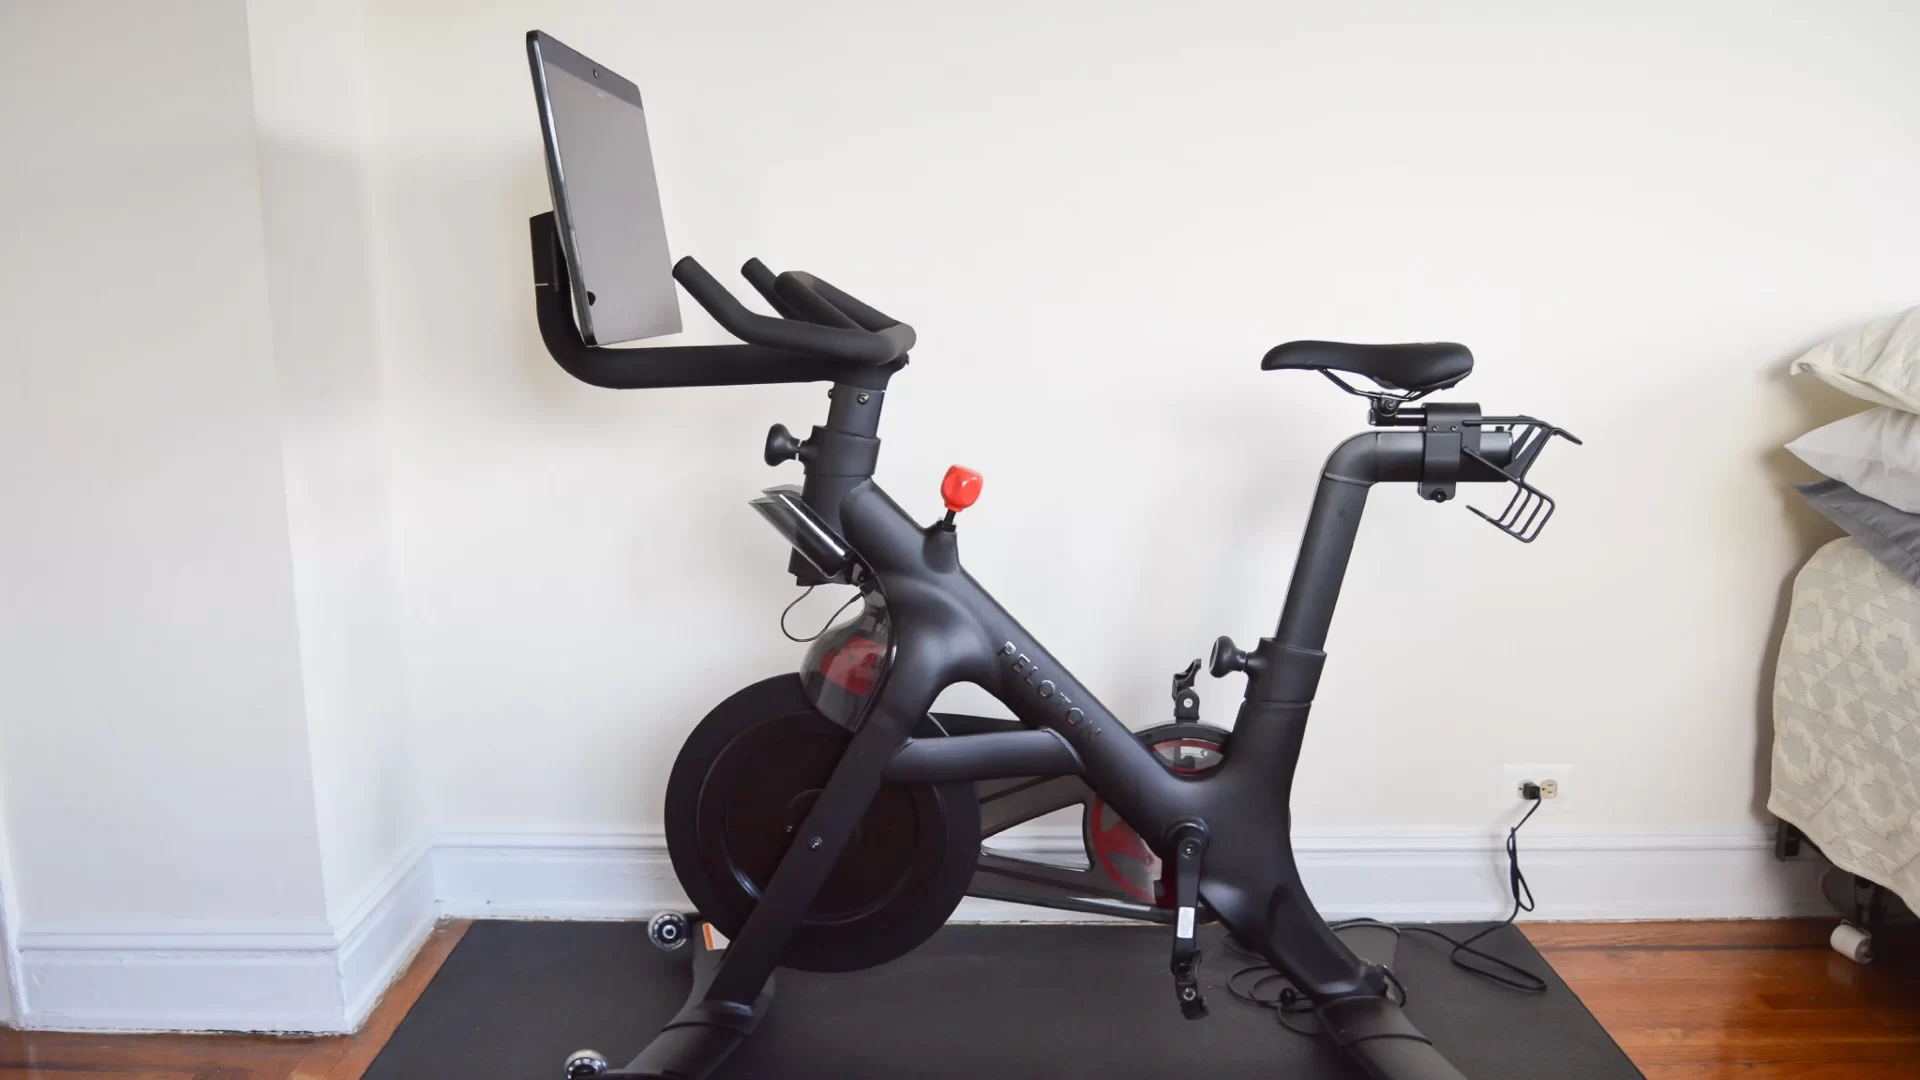 Why Do You Need To Sell Your Used Peloton Bike?